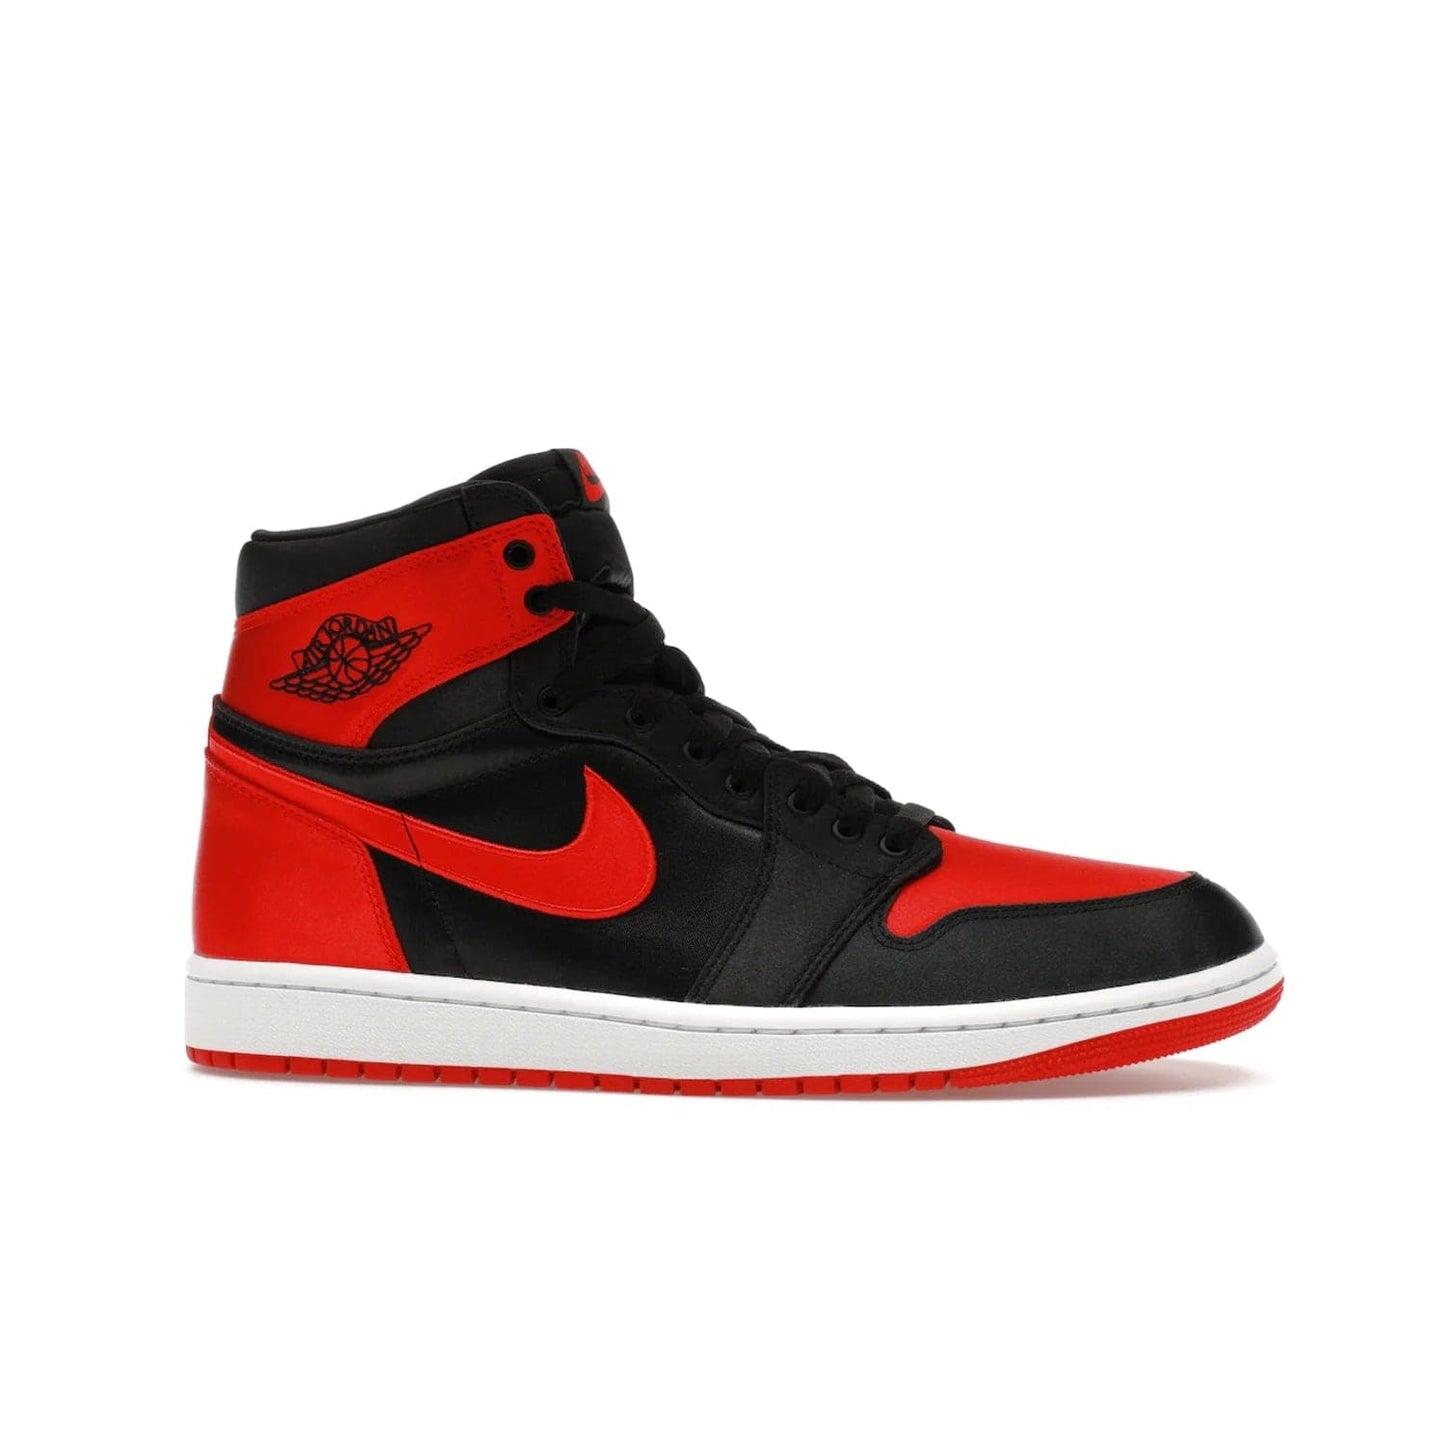 Jordan 1 Retro High OG Satin Bred (Women's) - Image 2 - Only at www.BallersClubKickz.com - Introducing the Jordan 1 Retro High OG Satin Bred (Women's). Luxe satin finish, contrasting hues & classic accents. Trending sneakers symbolizing timelessness & heritage. Make a bold statement with this iconic shoe. Available October 4, 2023.